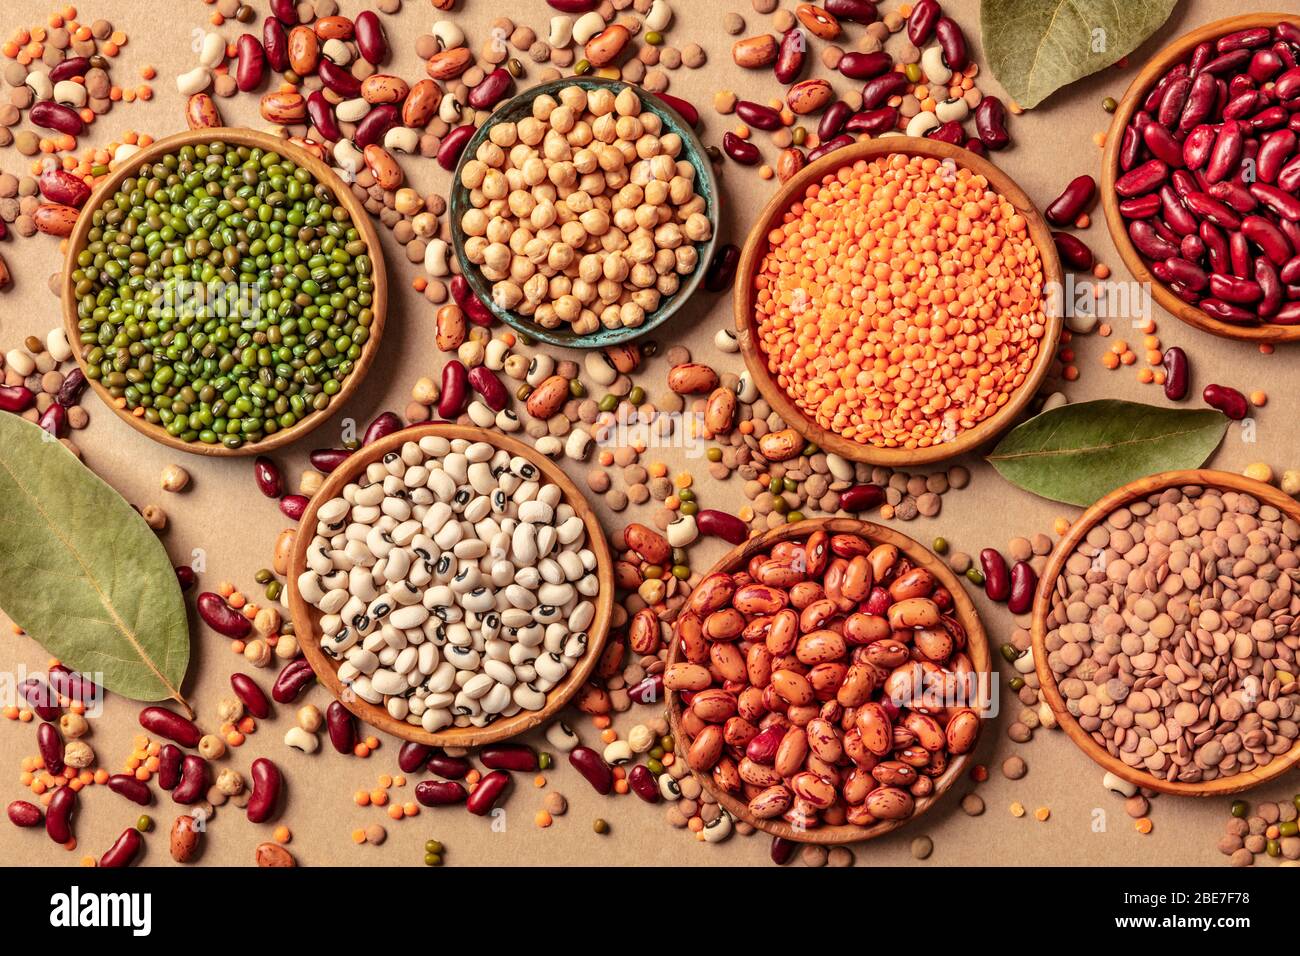 Legumes assortment, shot from above on a brown background. Lentils, soybeans, chickpeas, red kidney beans, a vatiety of pulses Stock Photo